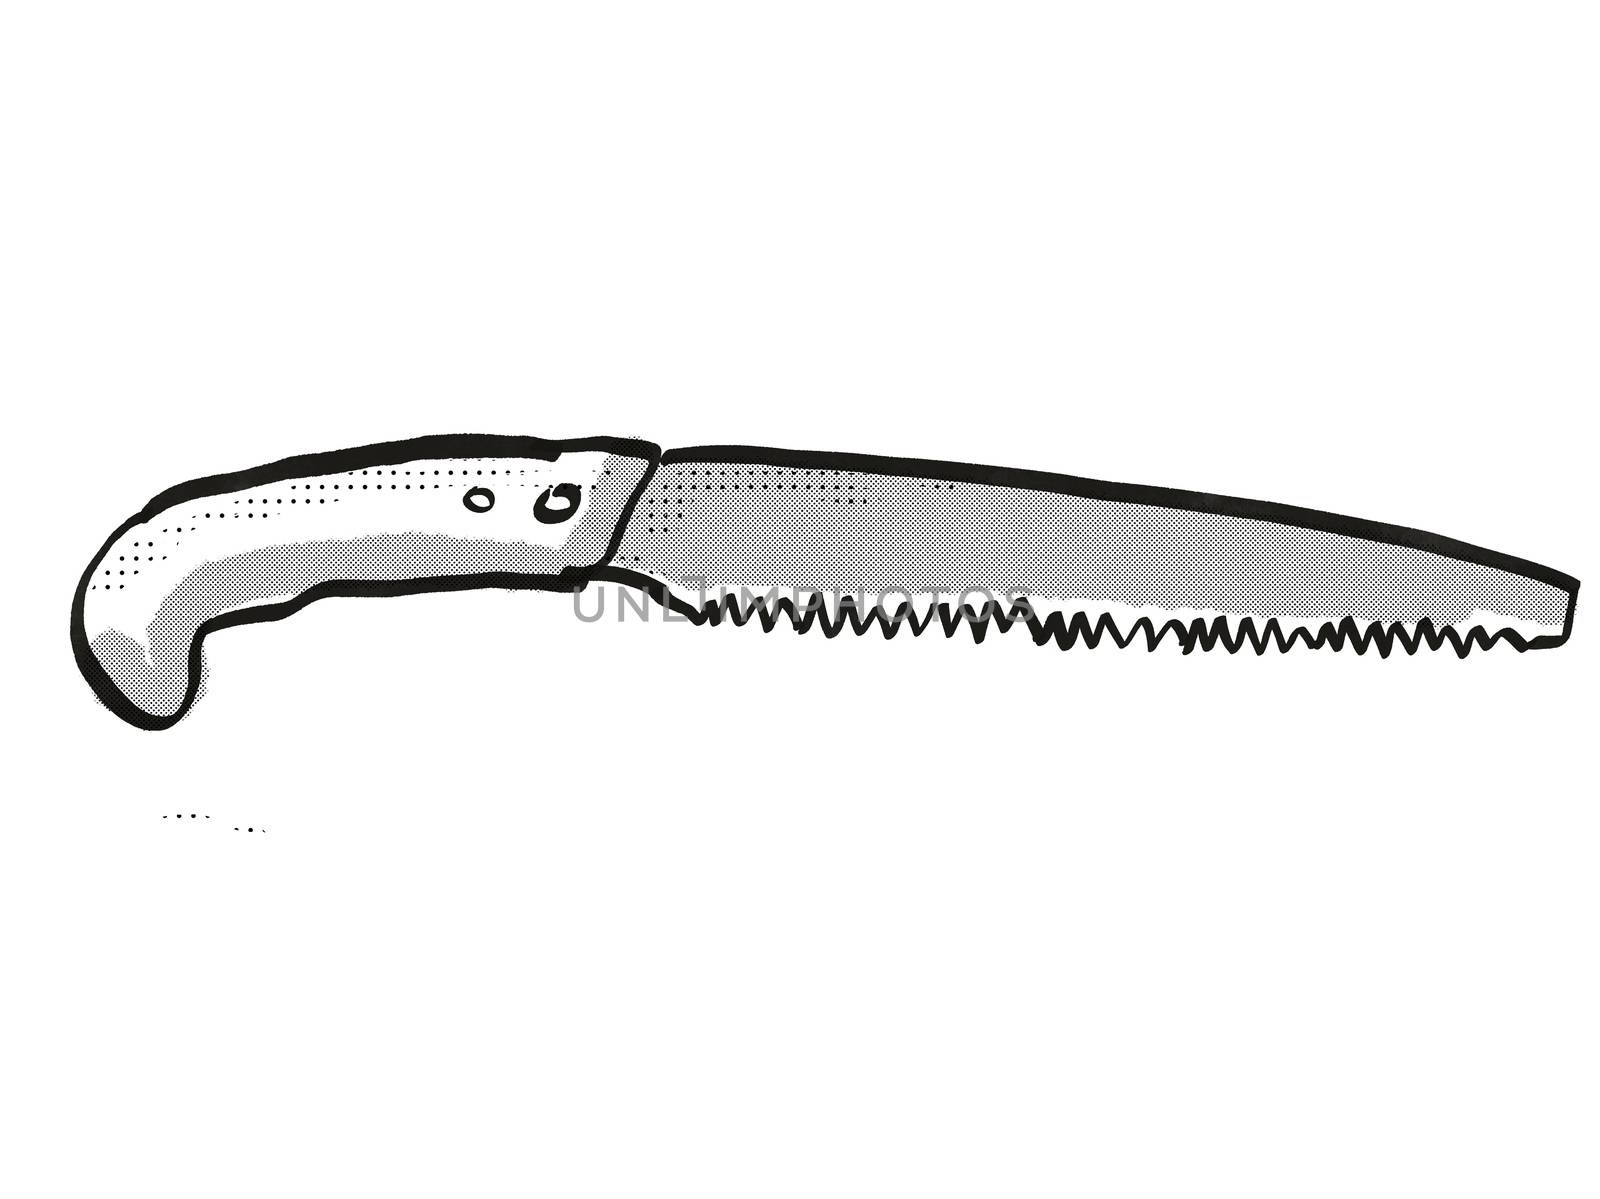 Retro cartoon style drawing of a Japanese pruning saw, a garden or gardening tool equipment on isolated white background done in black and white